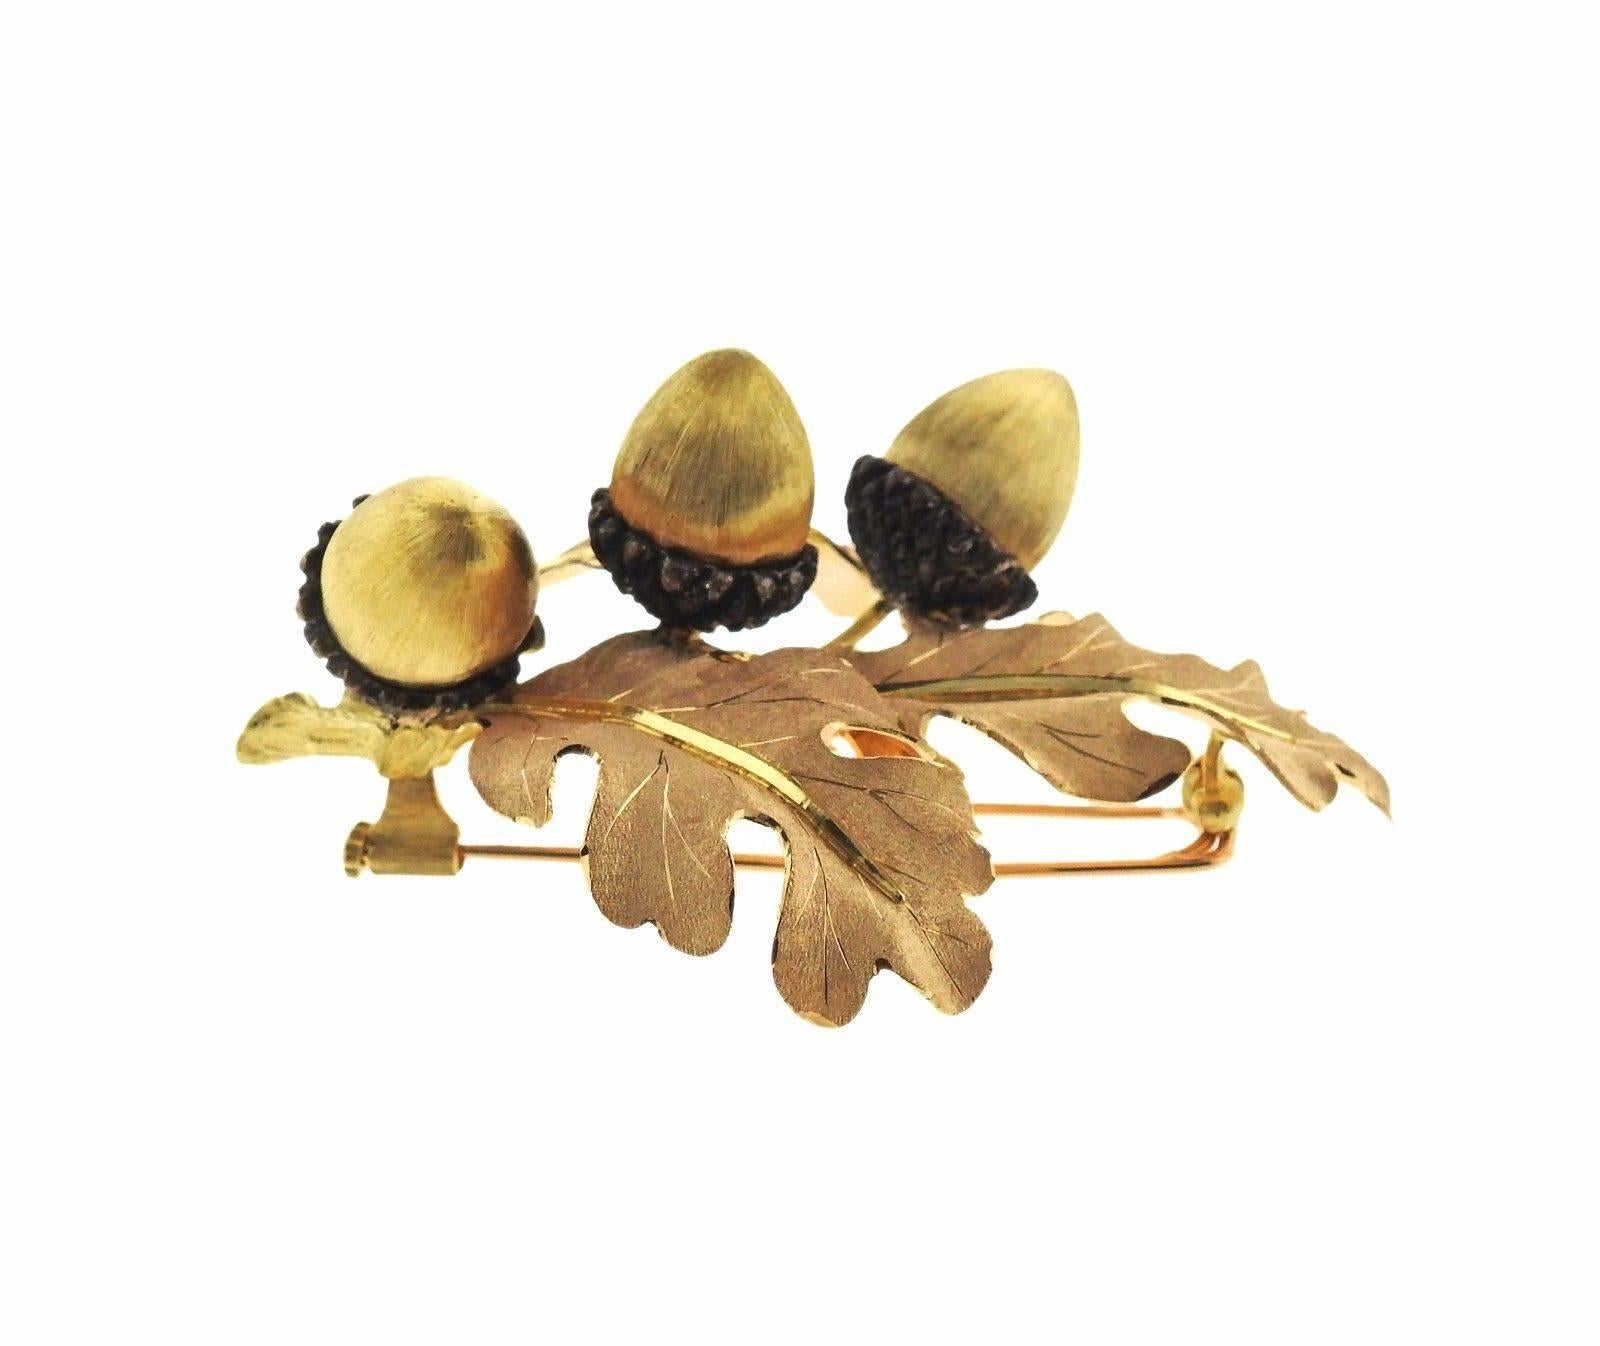 An 18k gold and sterling silver acorn brooch pin.  The brooch measures 58mm X 44mm and weighs 26.7 grams.  Marked: Buccellati 18K Italy.  Comes with Buccellati paperwork. Retail is $12620.